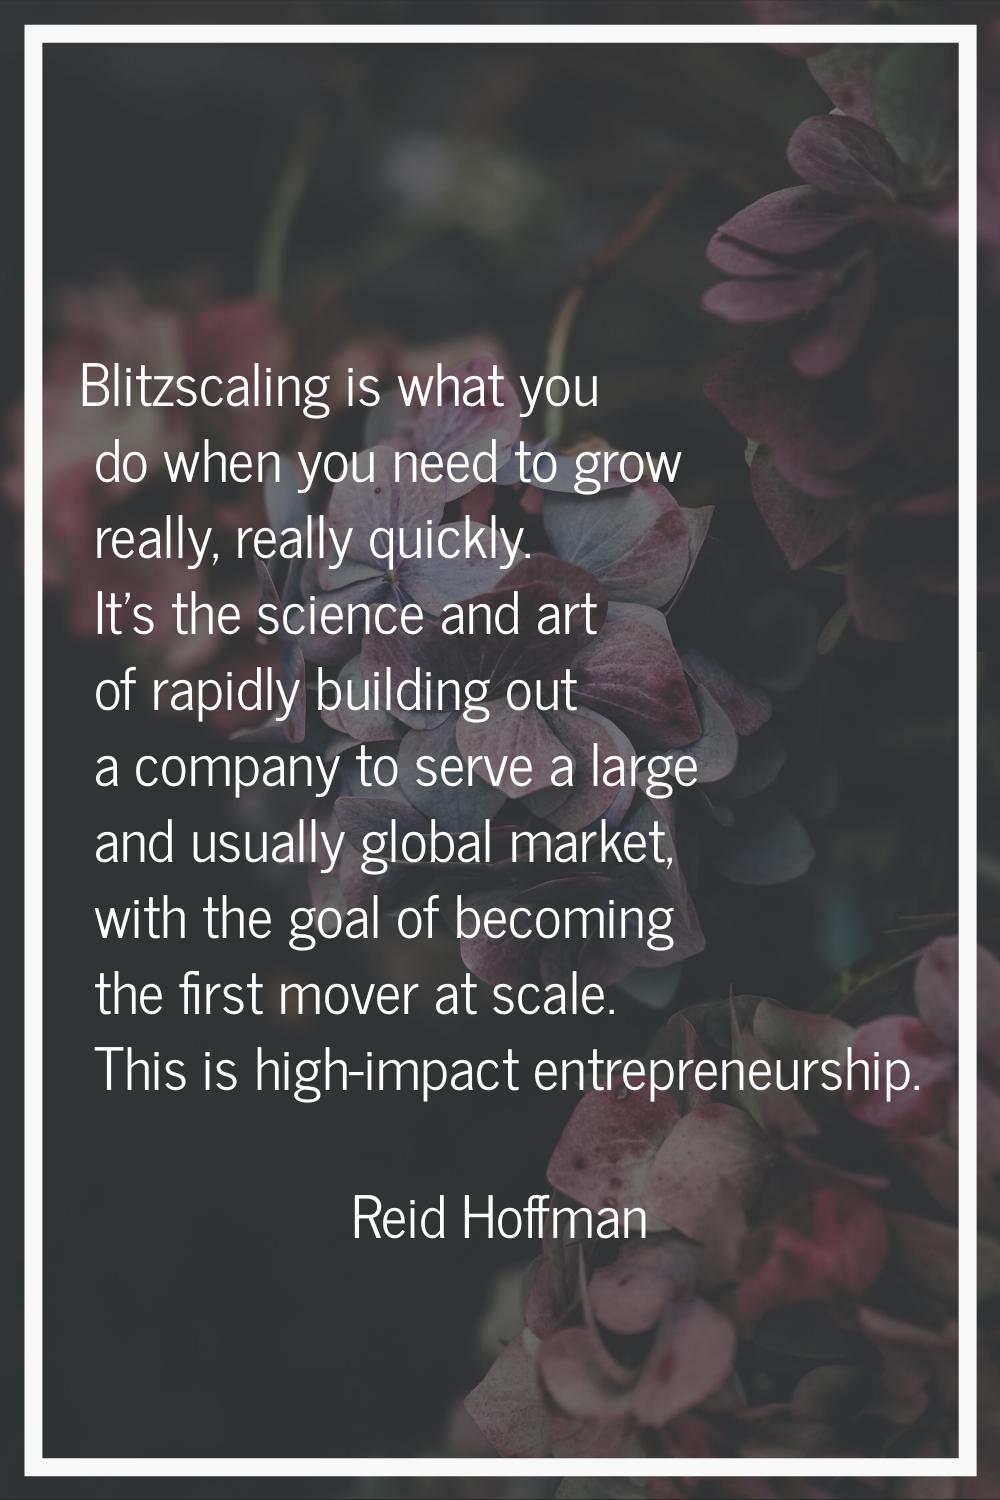 Blitzscaling is what you do when you need to grow really, really quickly. It's the science and art 